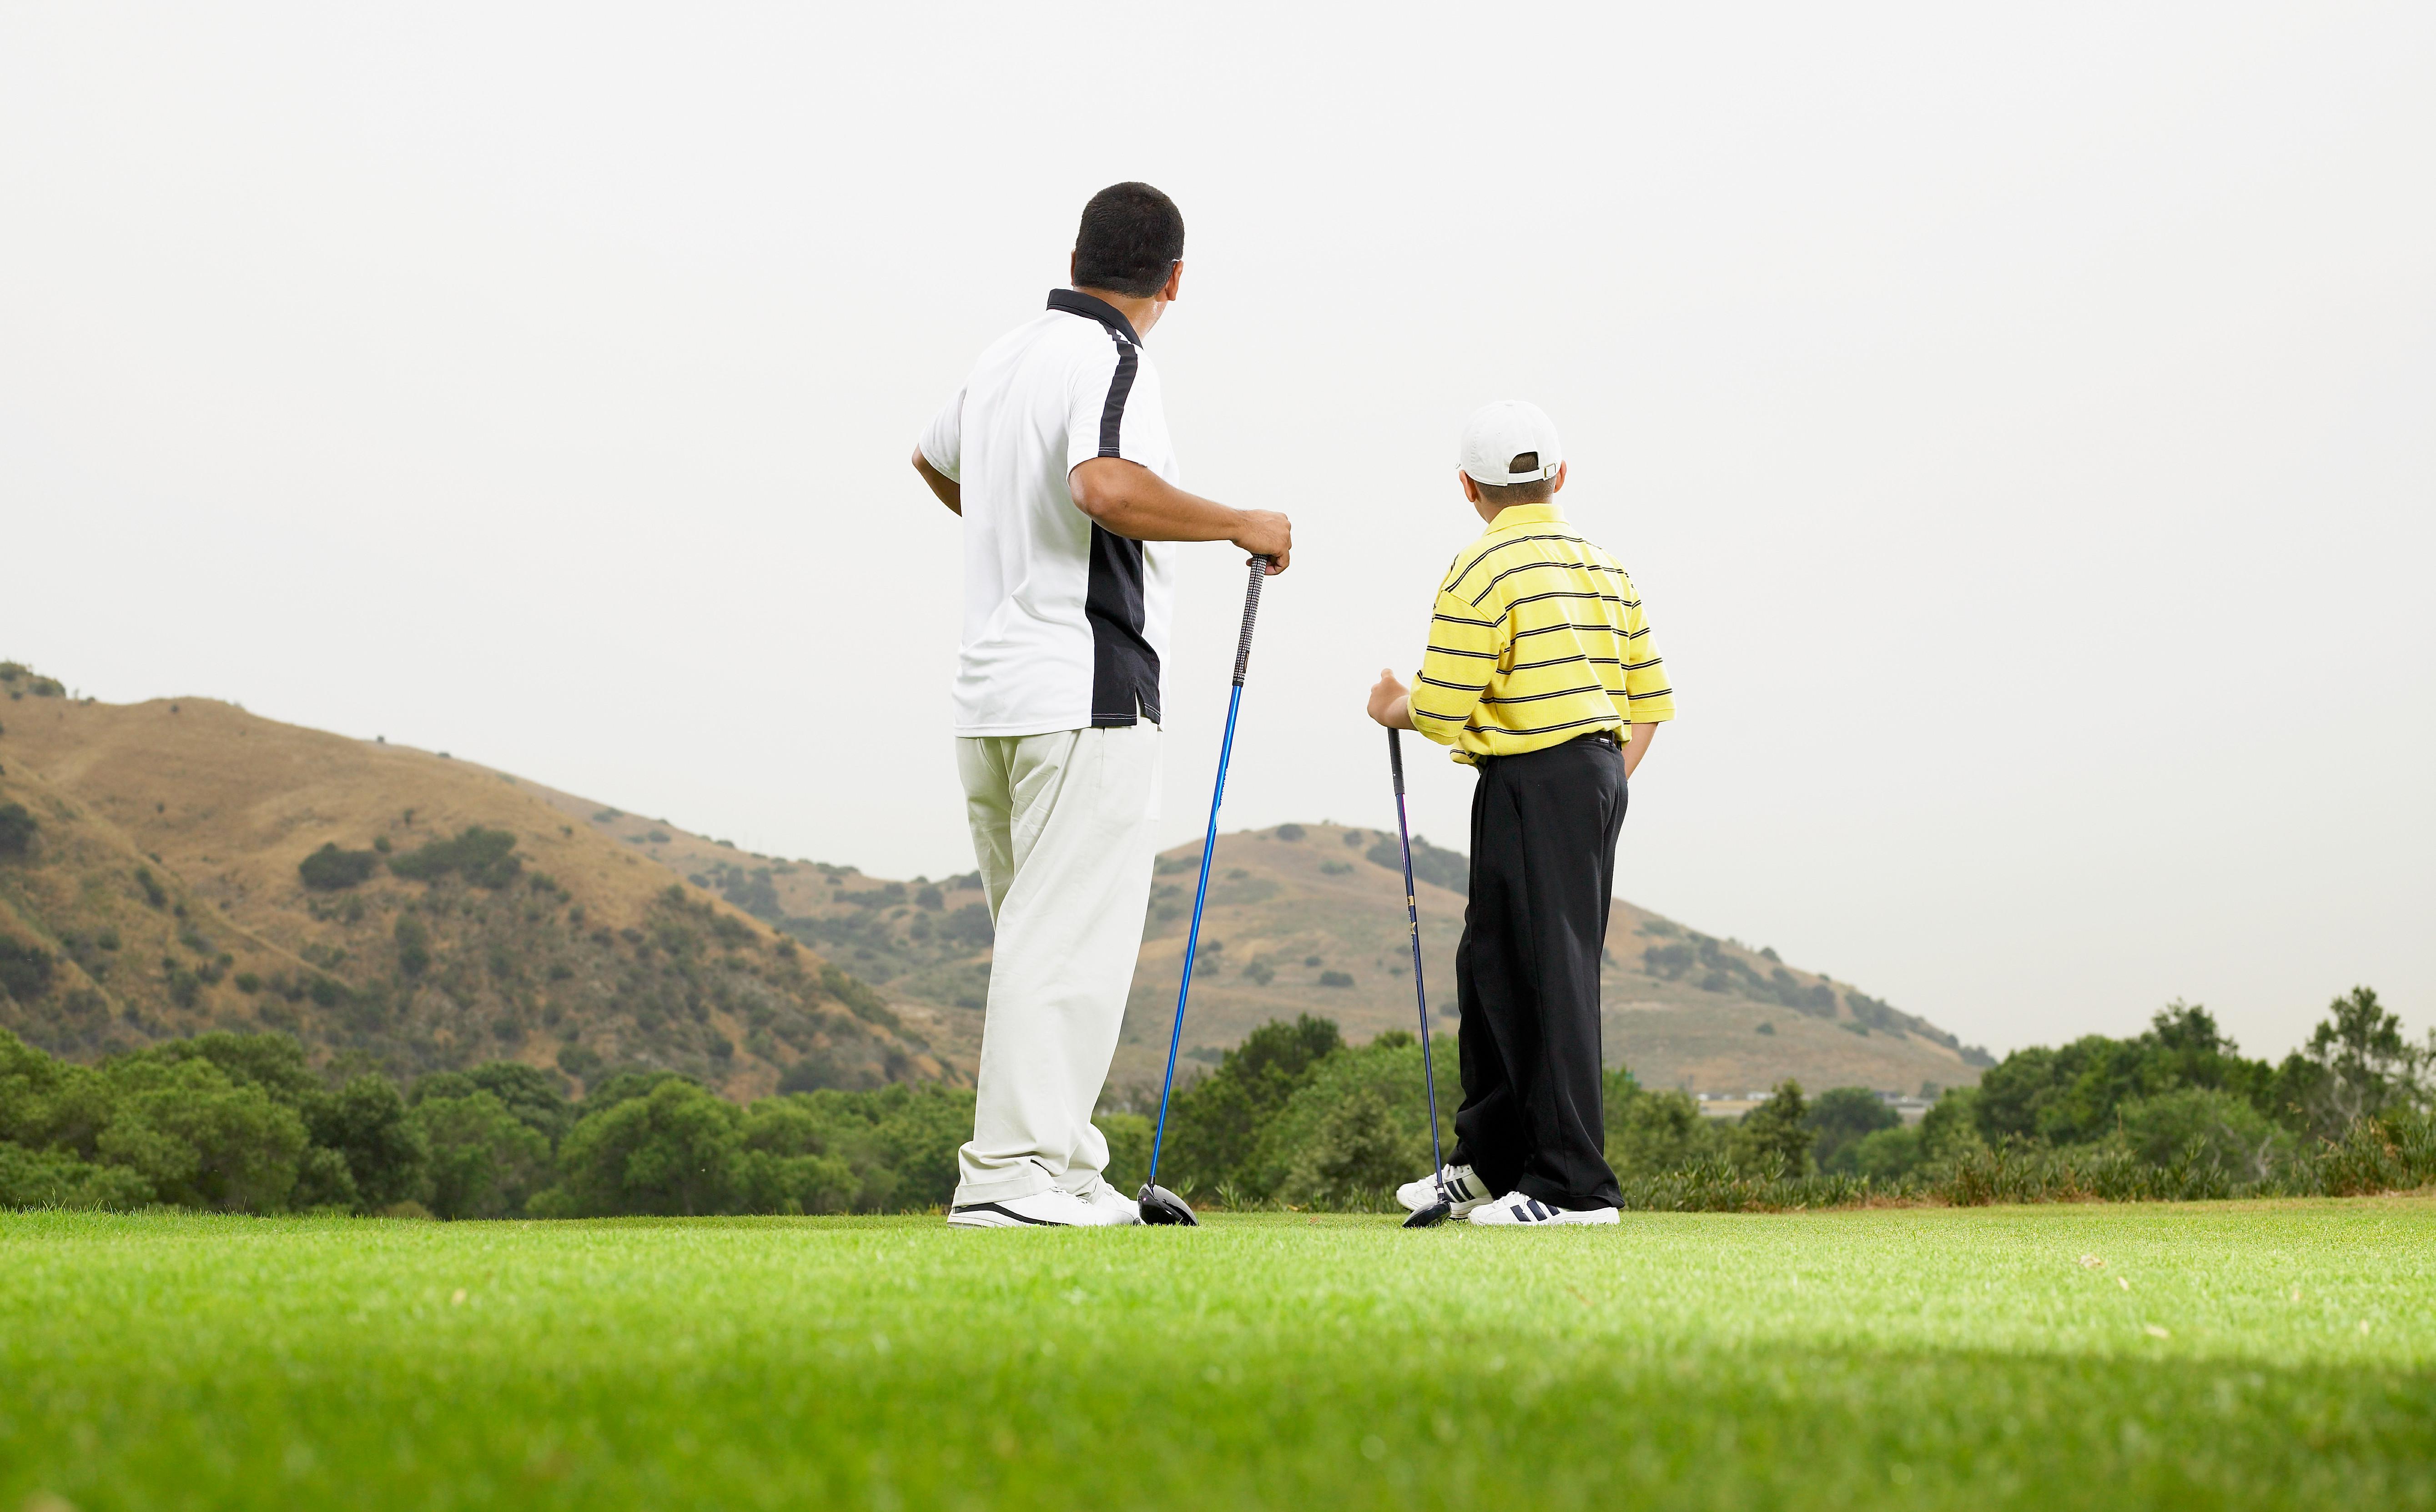 Father and son (8-10) playing golf together, rear view